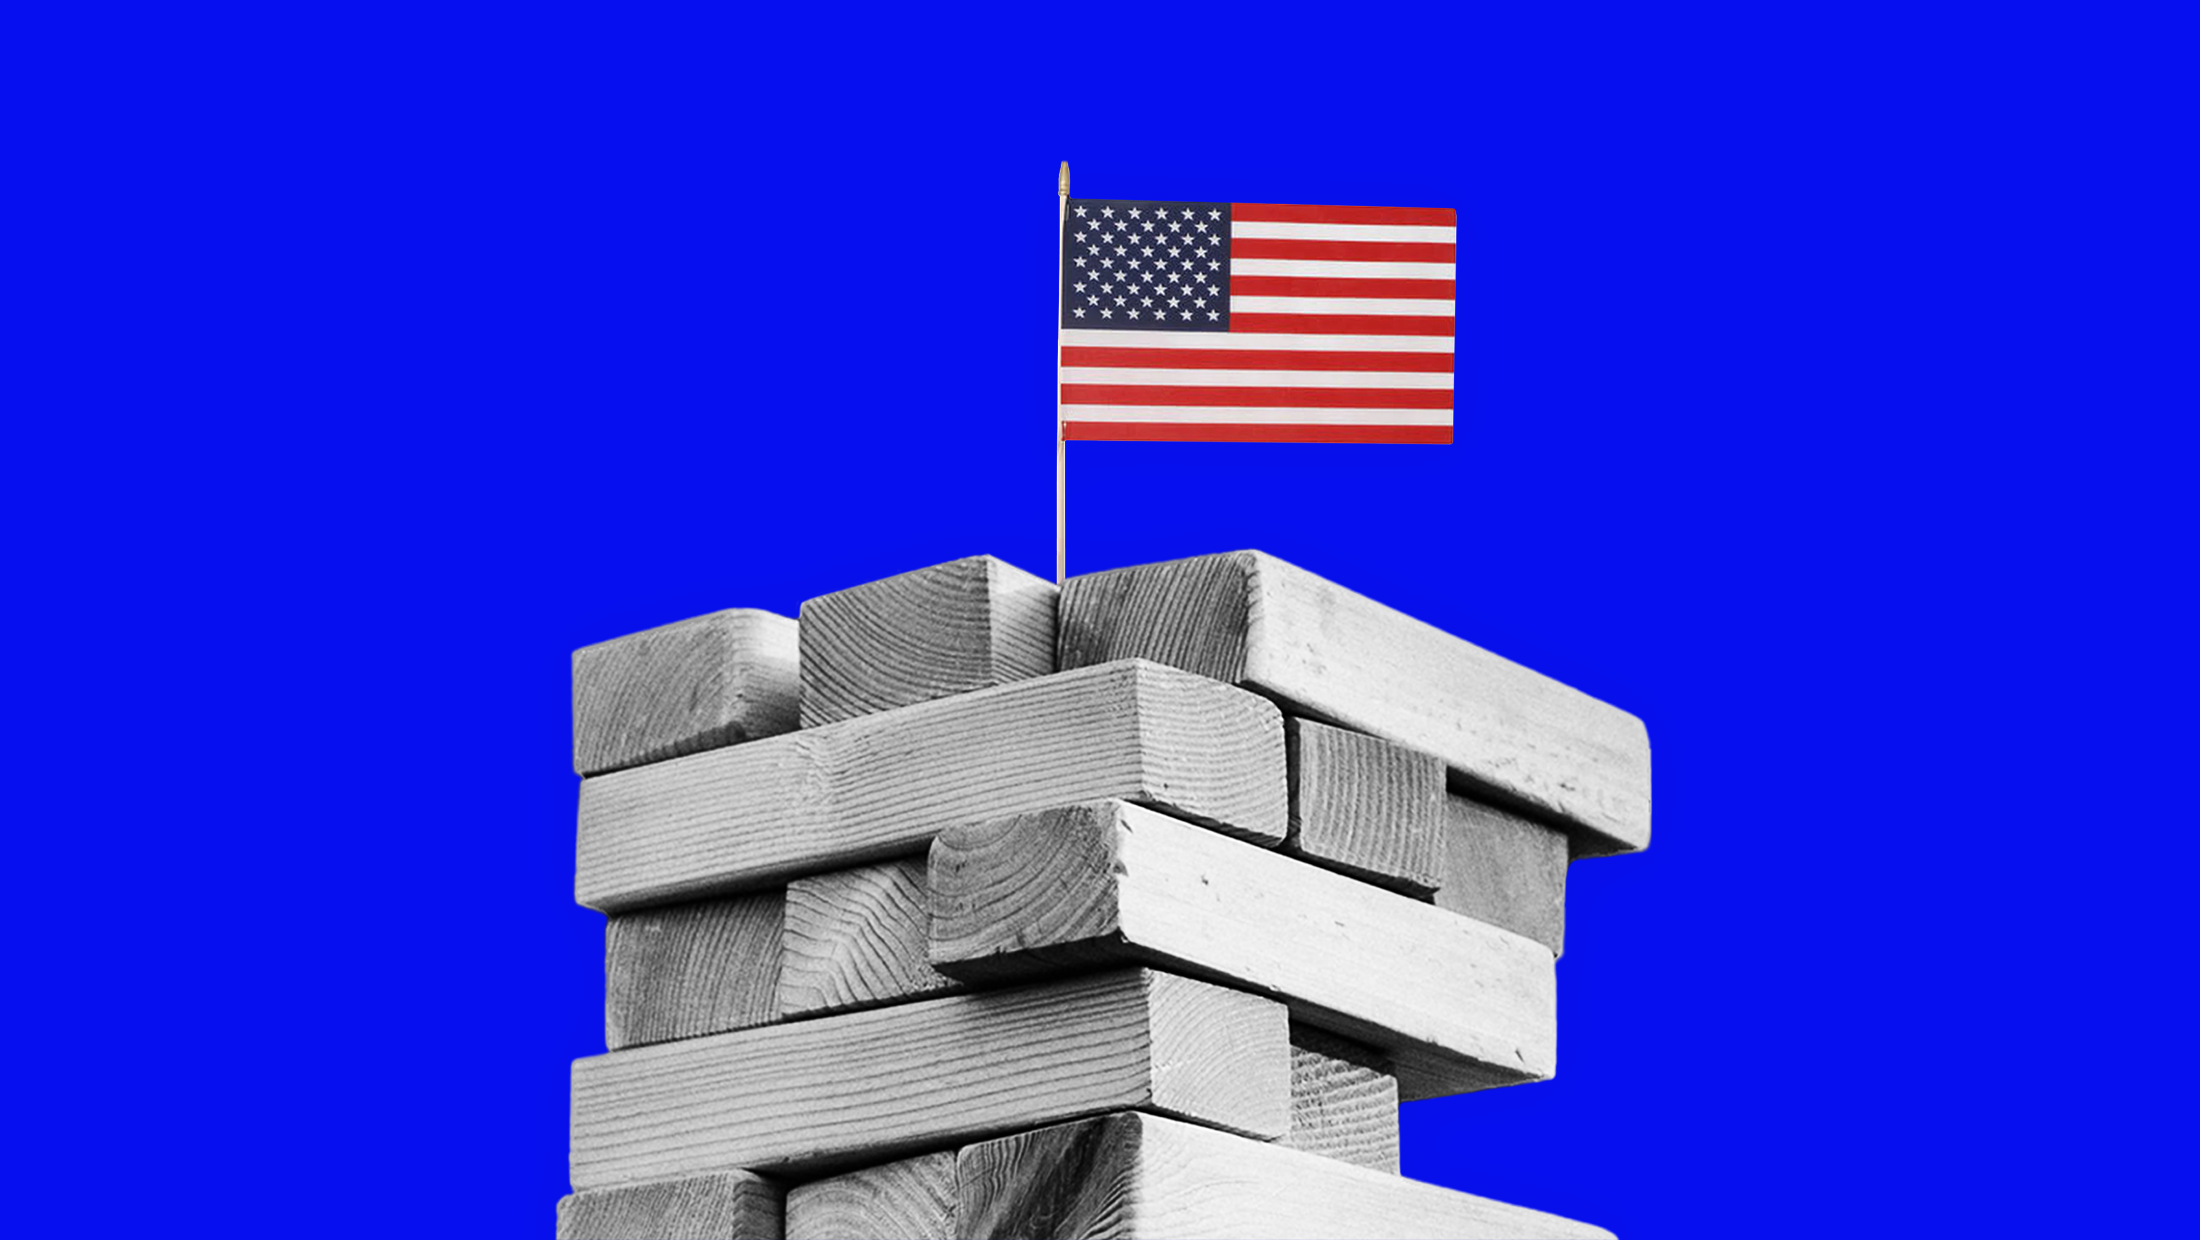 A Jenga-type tower of wooden building blocks with a U.S. flag planted at the top